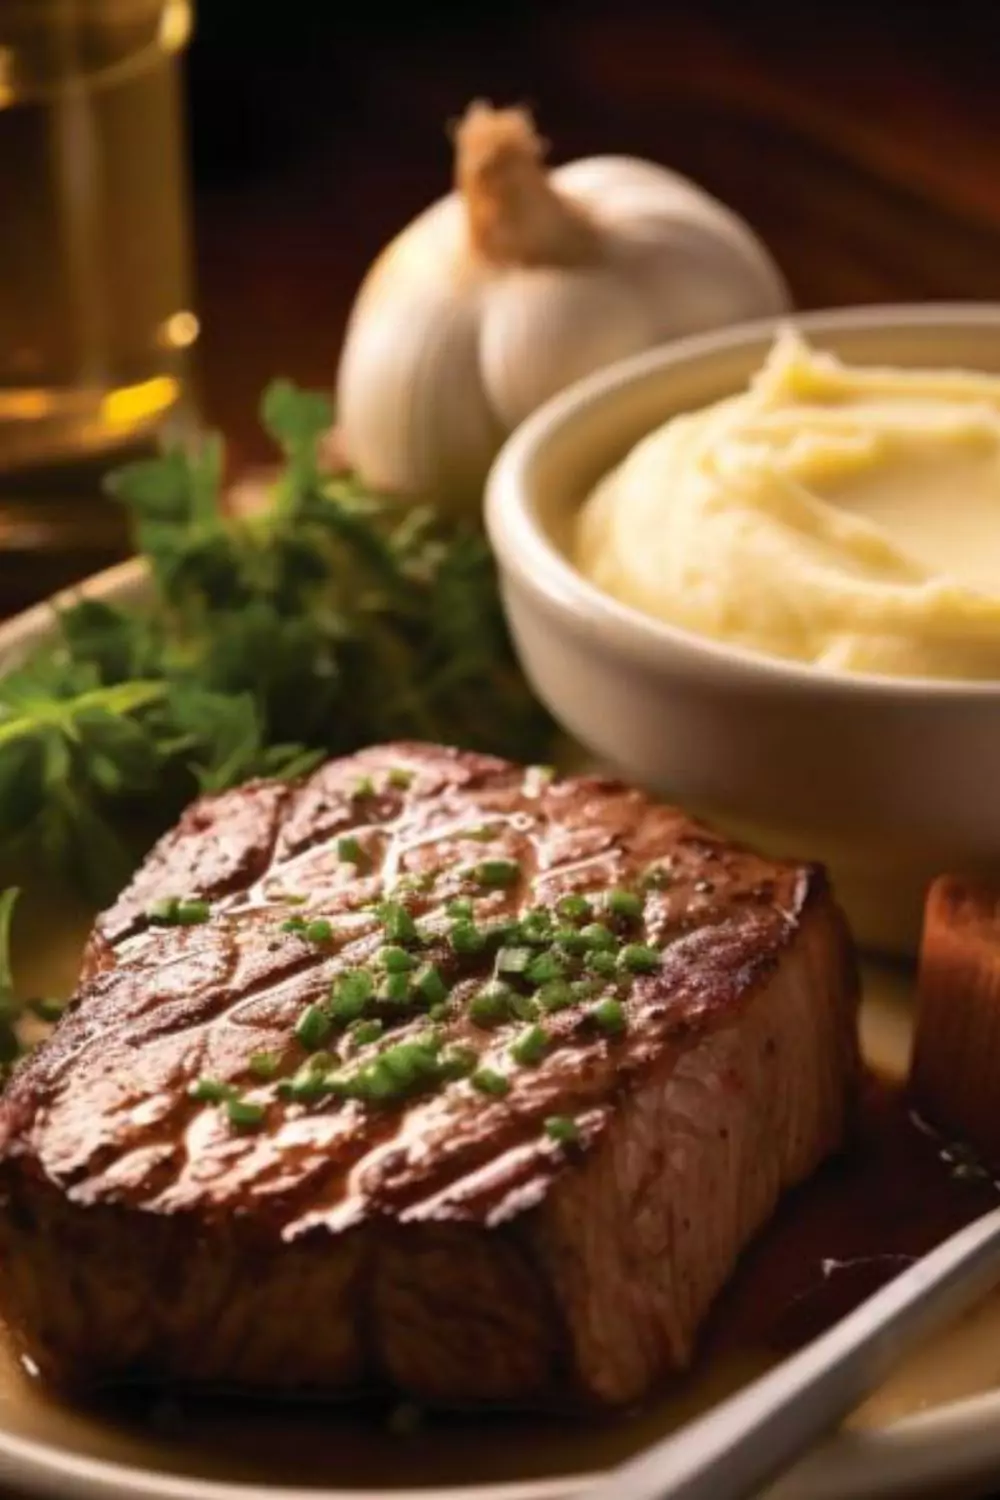 Capital Grille Shallot Butter Recipe